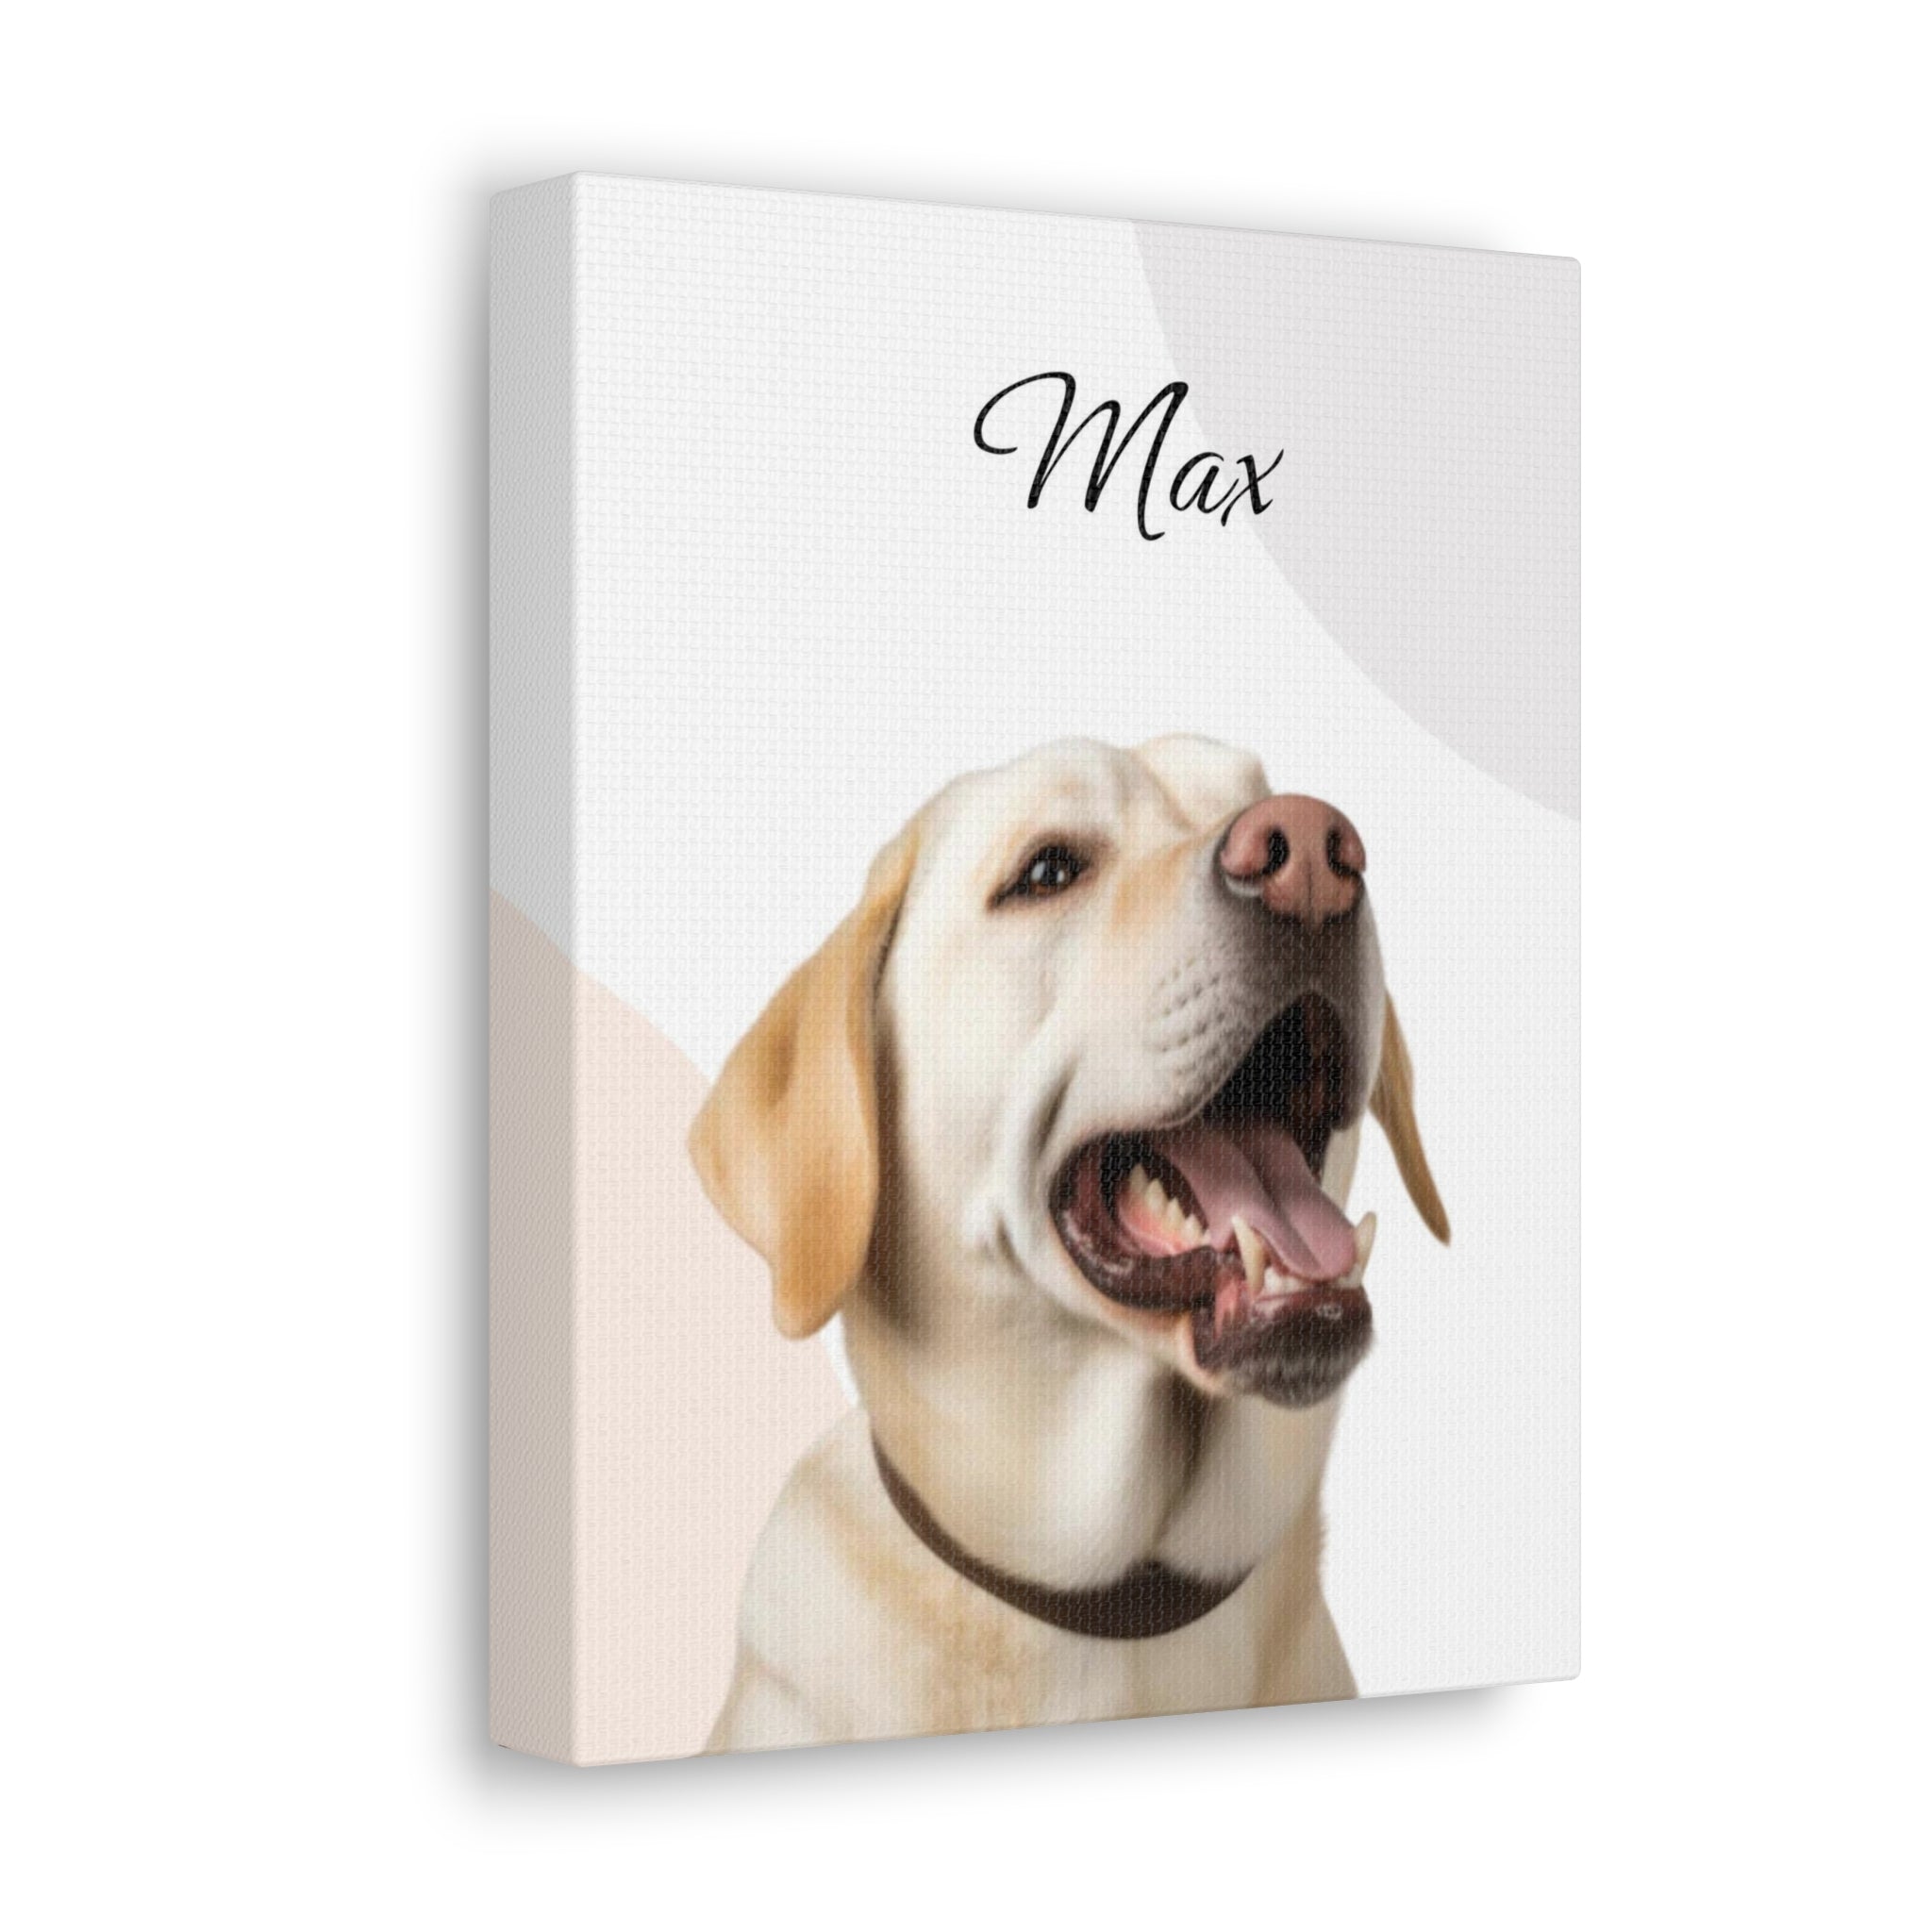 Pet Portrait - Personalized Pet Gift with Photo and Name